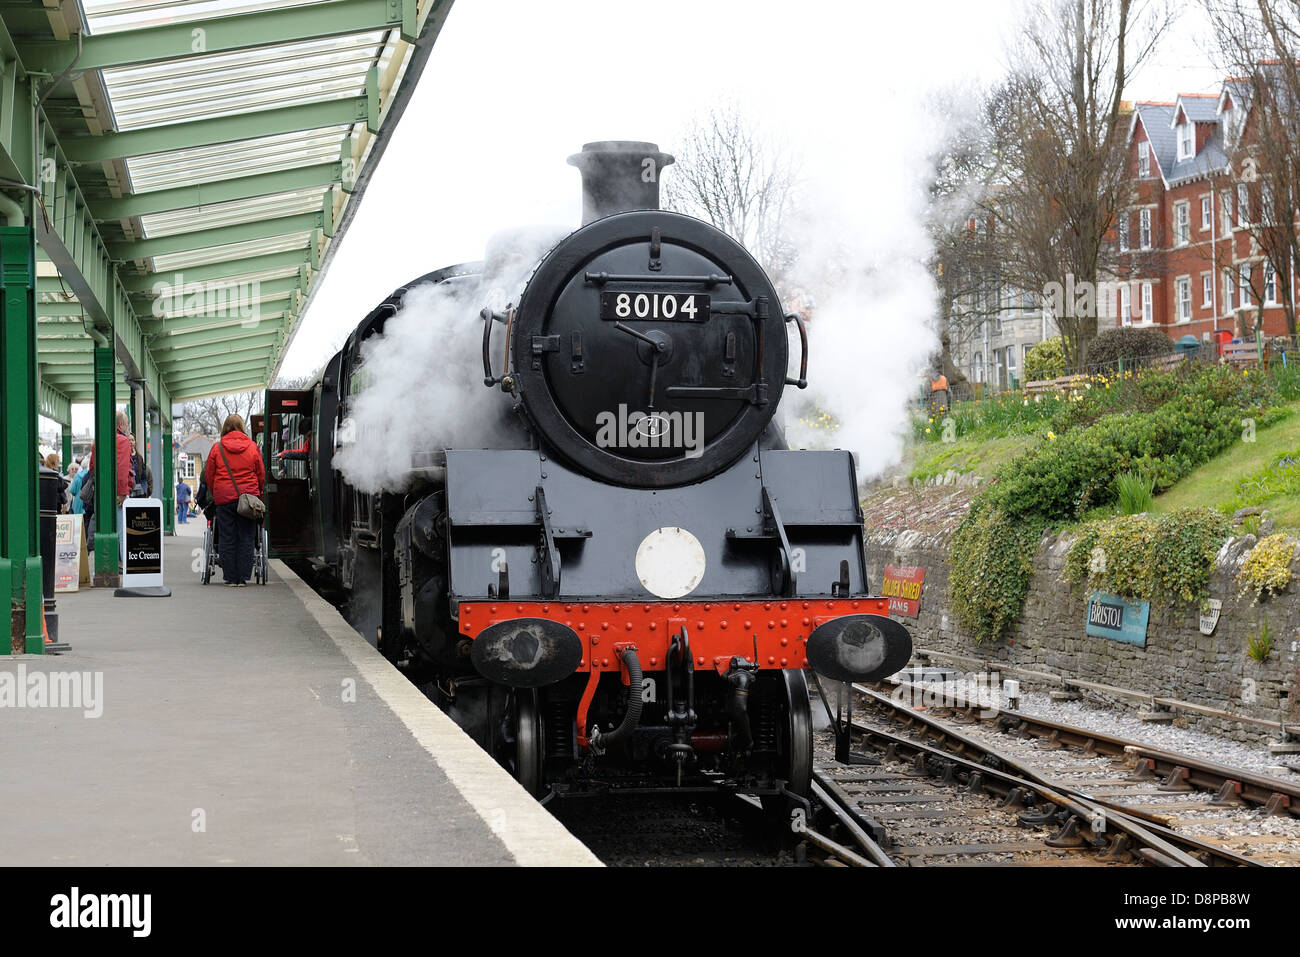 BR Standard Class 4 locomotive No. 80104 arriving a swanage with a service train from Corfe castle Dorset England uk Stock Photo